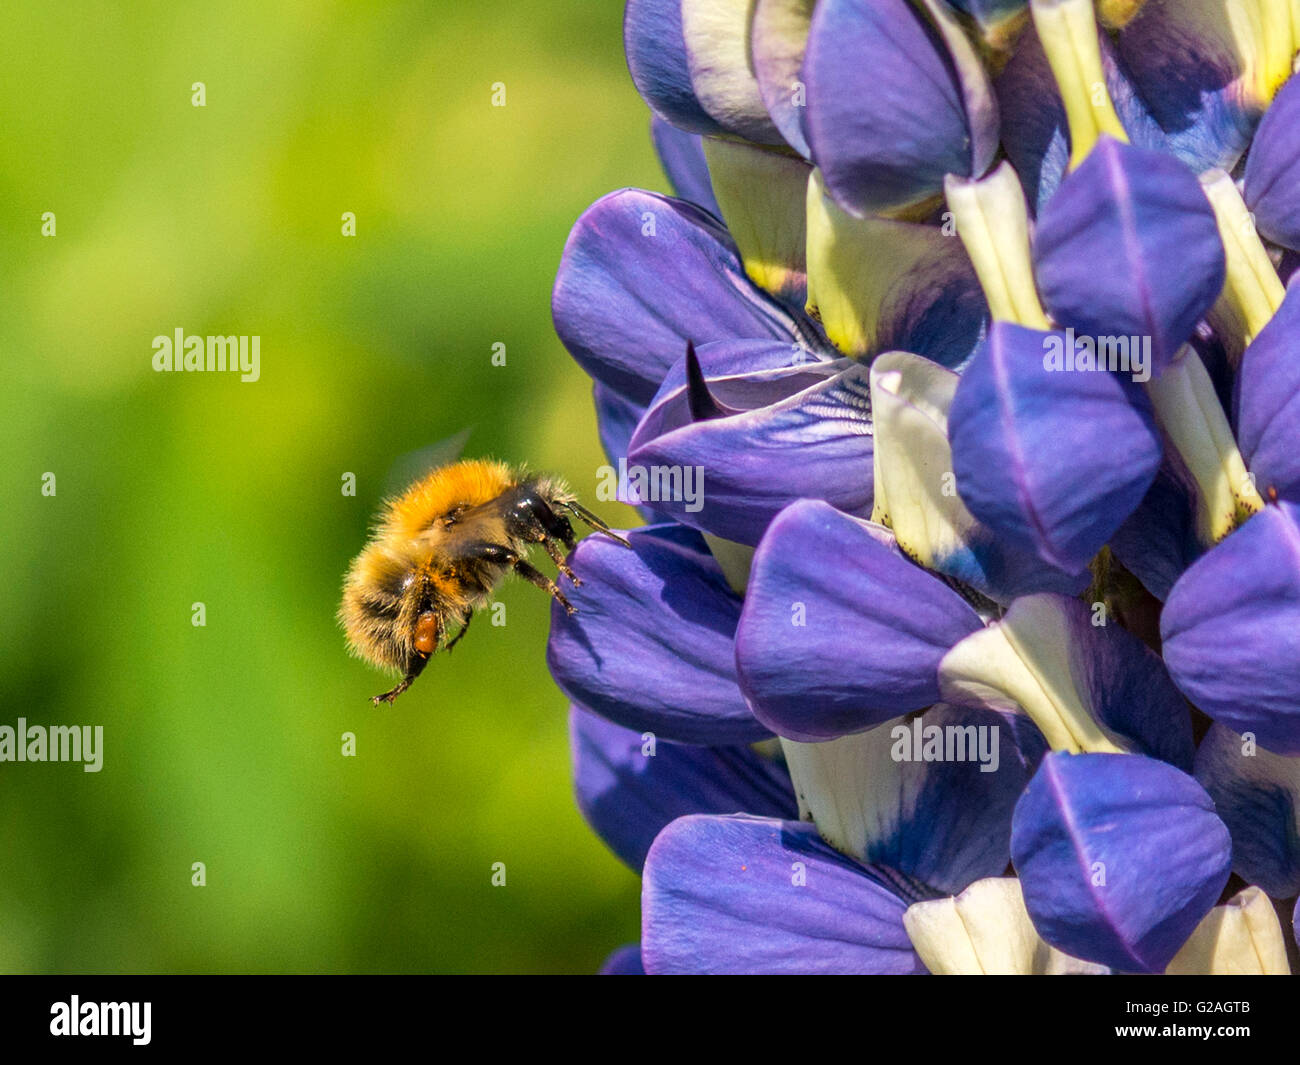 Spring Pollinator, Bumblebee (Bombus) collecting nectar from the vivid blue spike-like raceme buds of the garden Lupin plant. Stock Photo